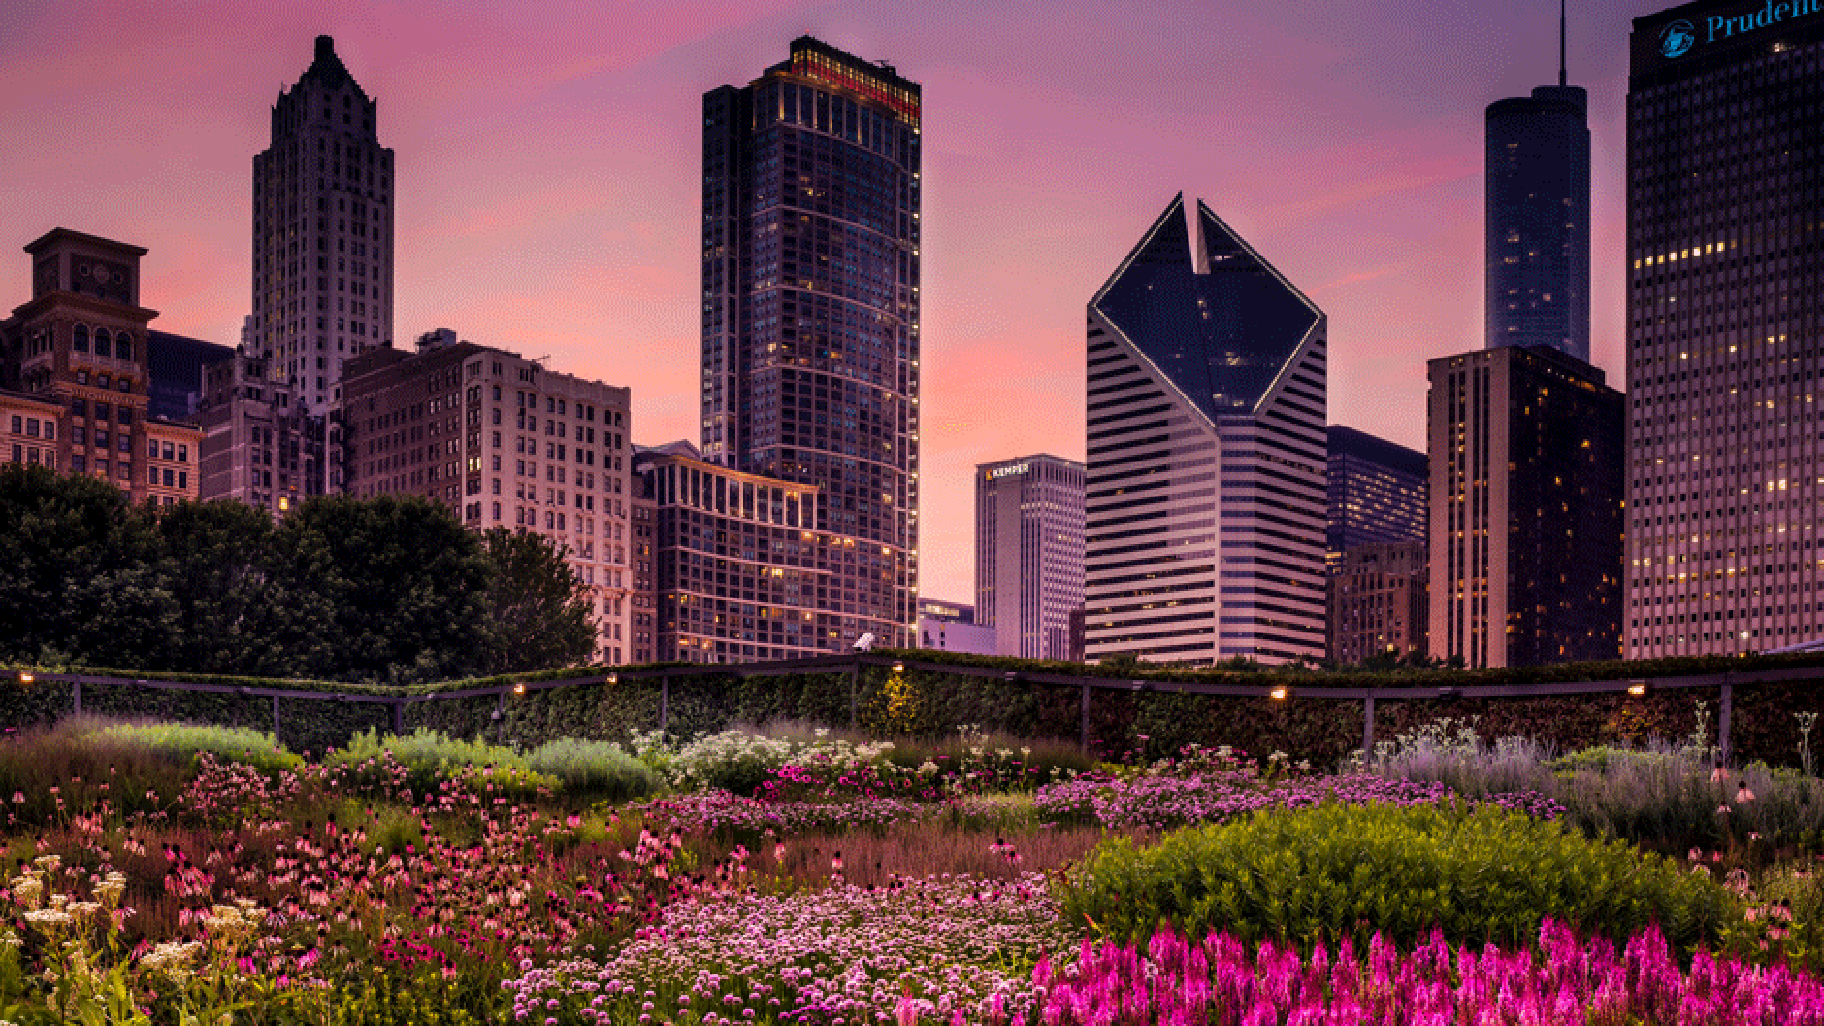 Stunning Image Of Lurie Garden Takes